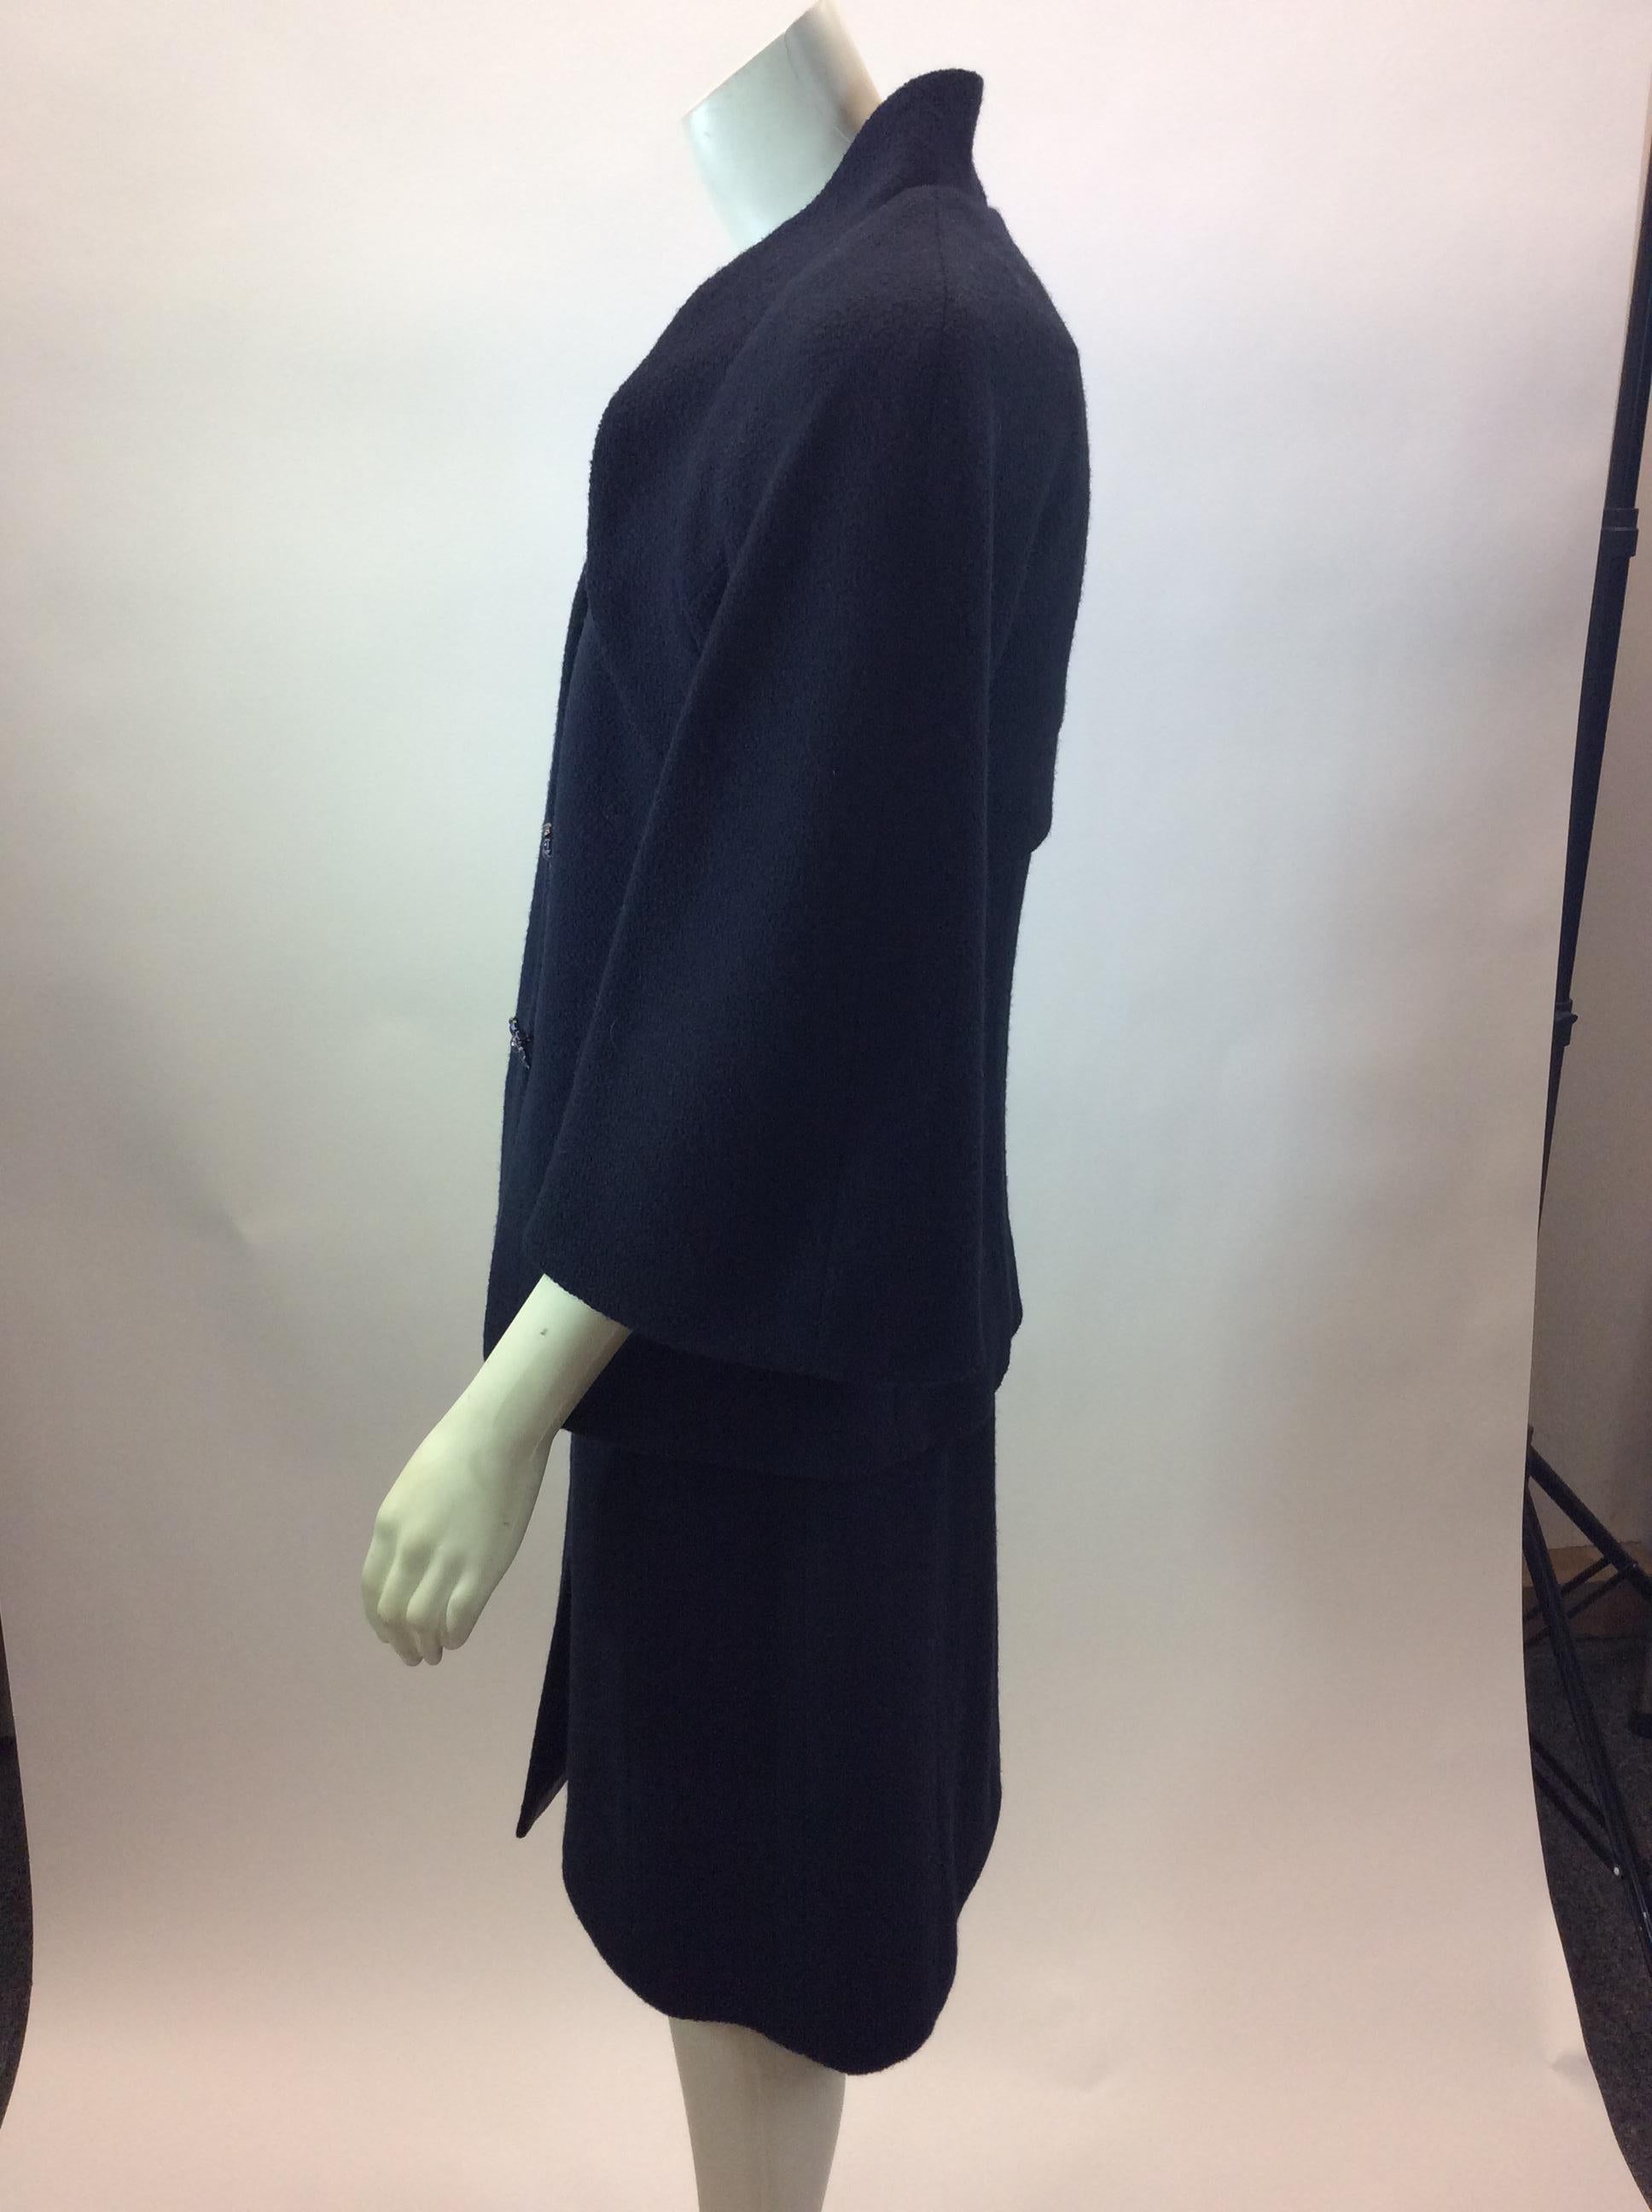 Chanel Navy Blue Wool Two Piece Dress Set
$1999
Made in France
100% wool
Jacket: Size 38
Length 24